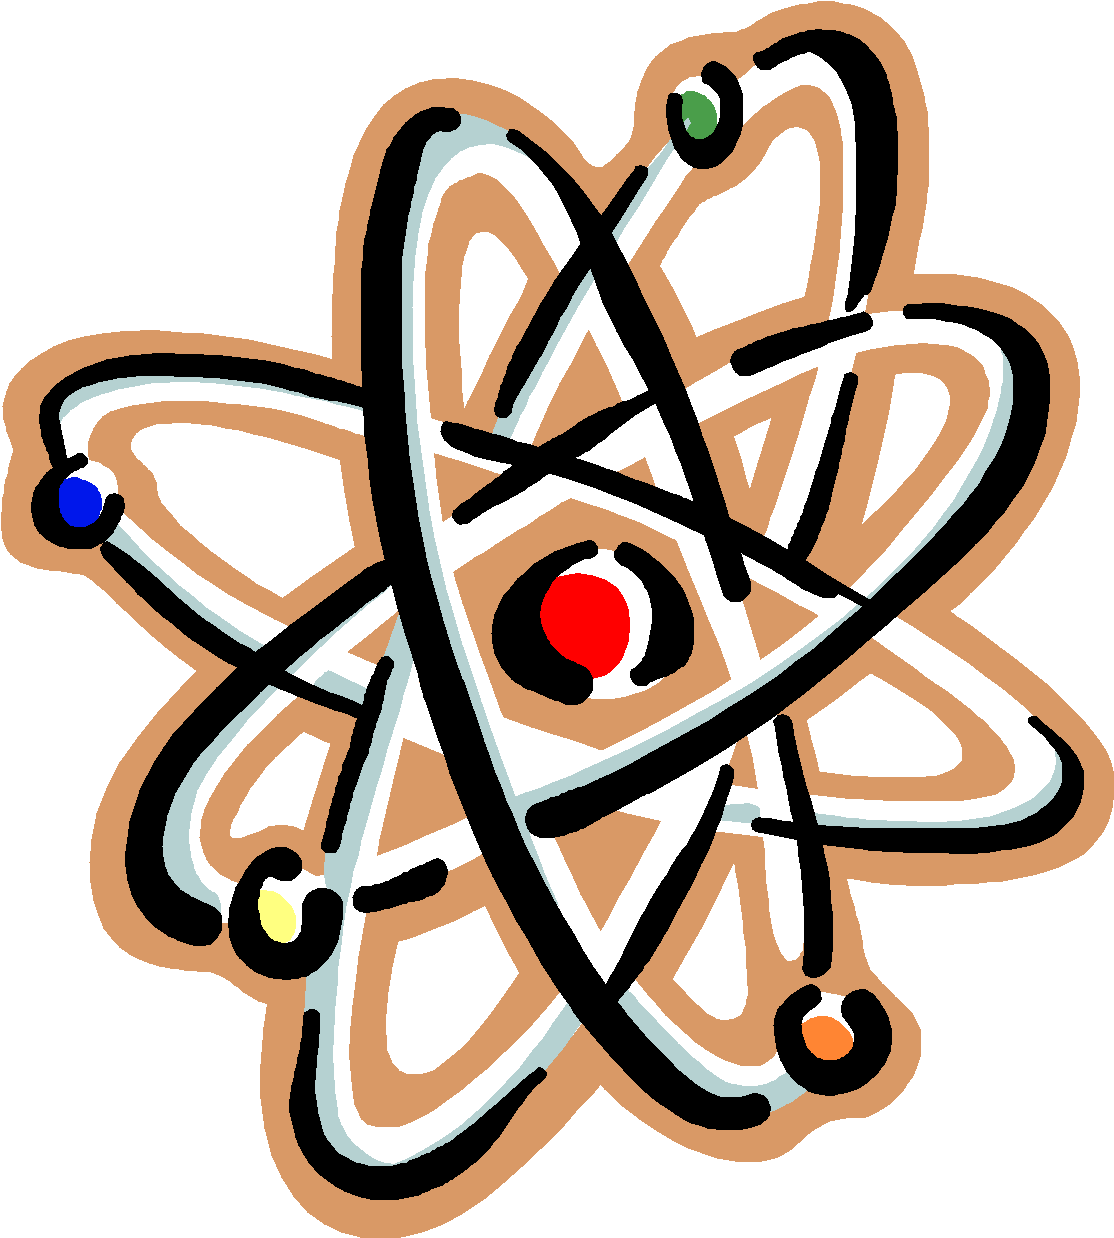 The Nucleus Is The Tiny Positive Core Of The Atom Which - The Nucleus Is The Tiny Positive Core Of The Atom Which (1201x1330)